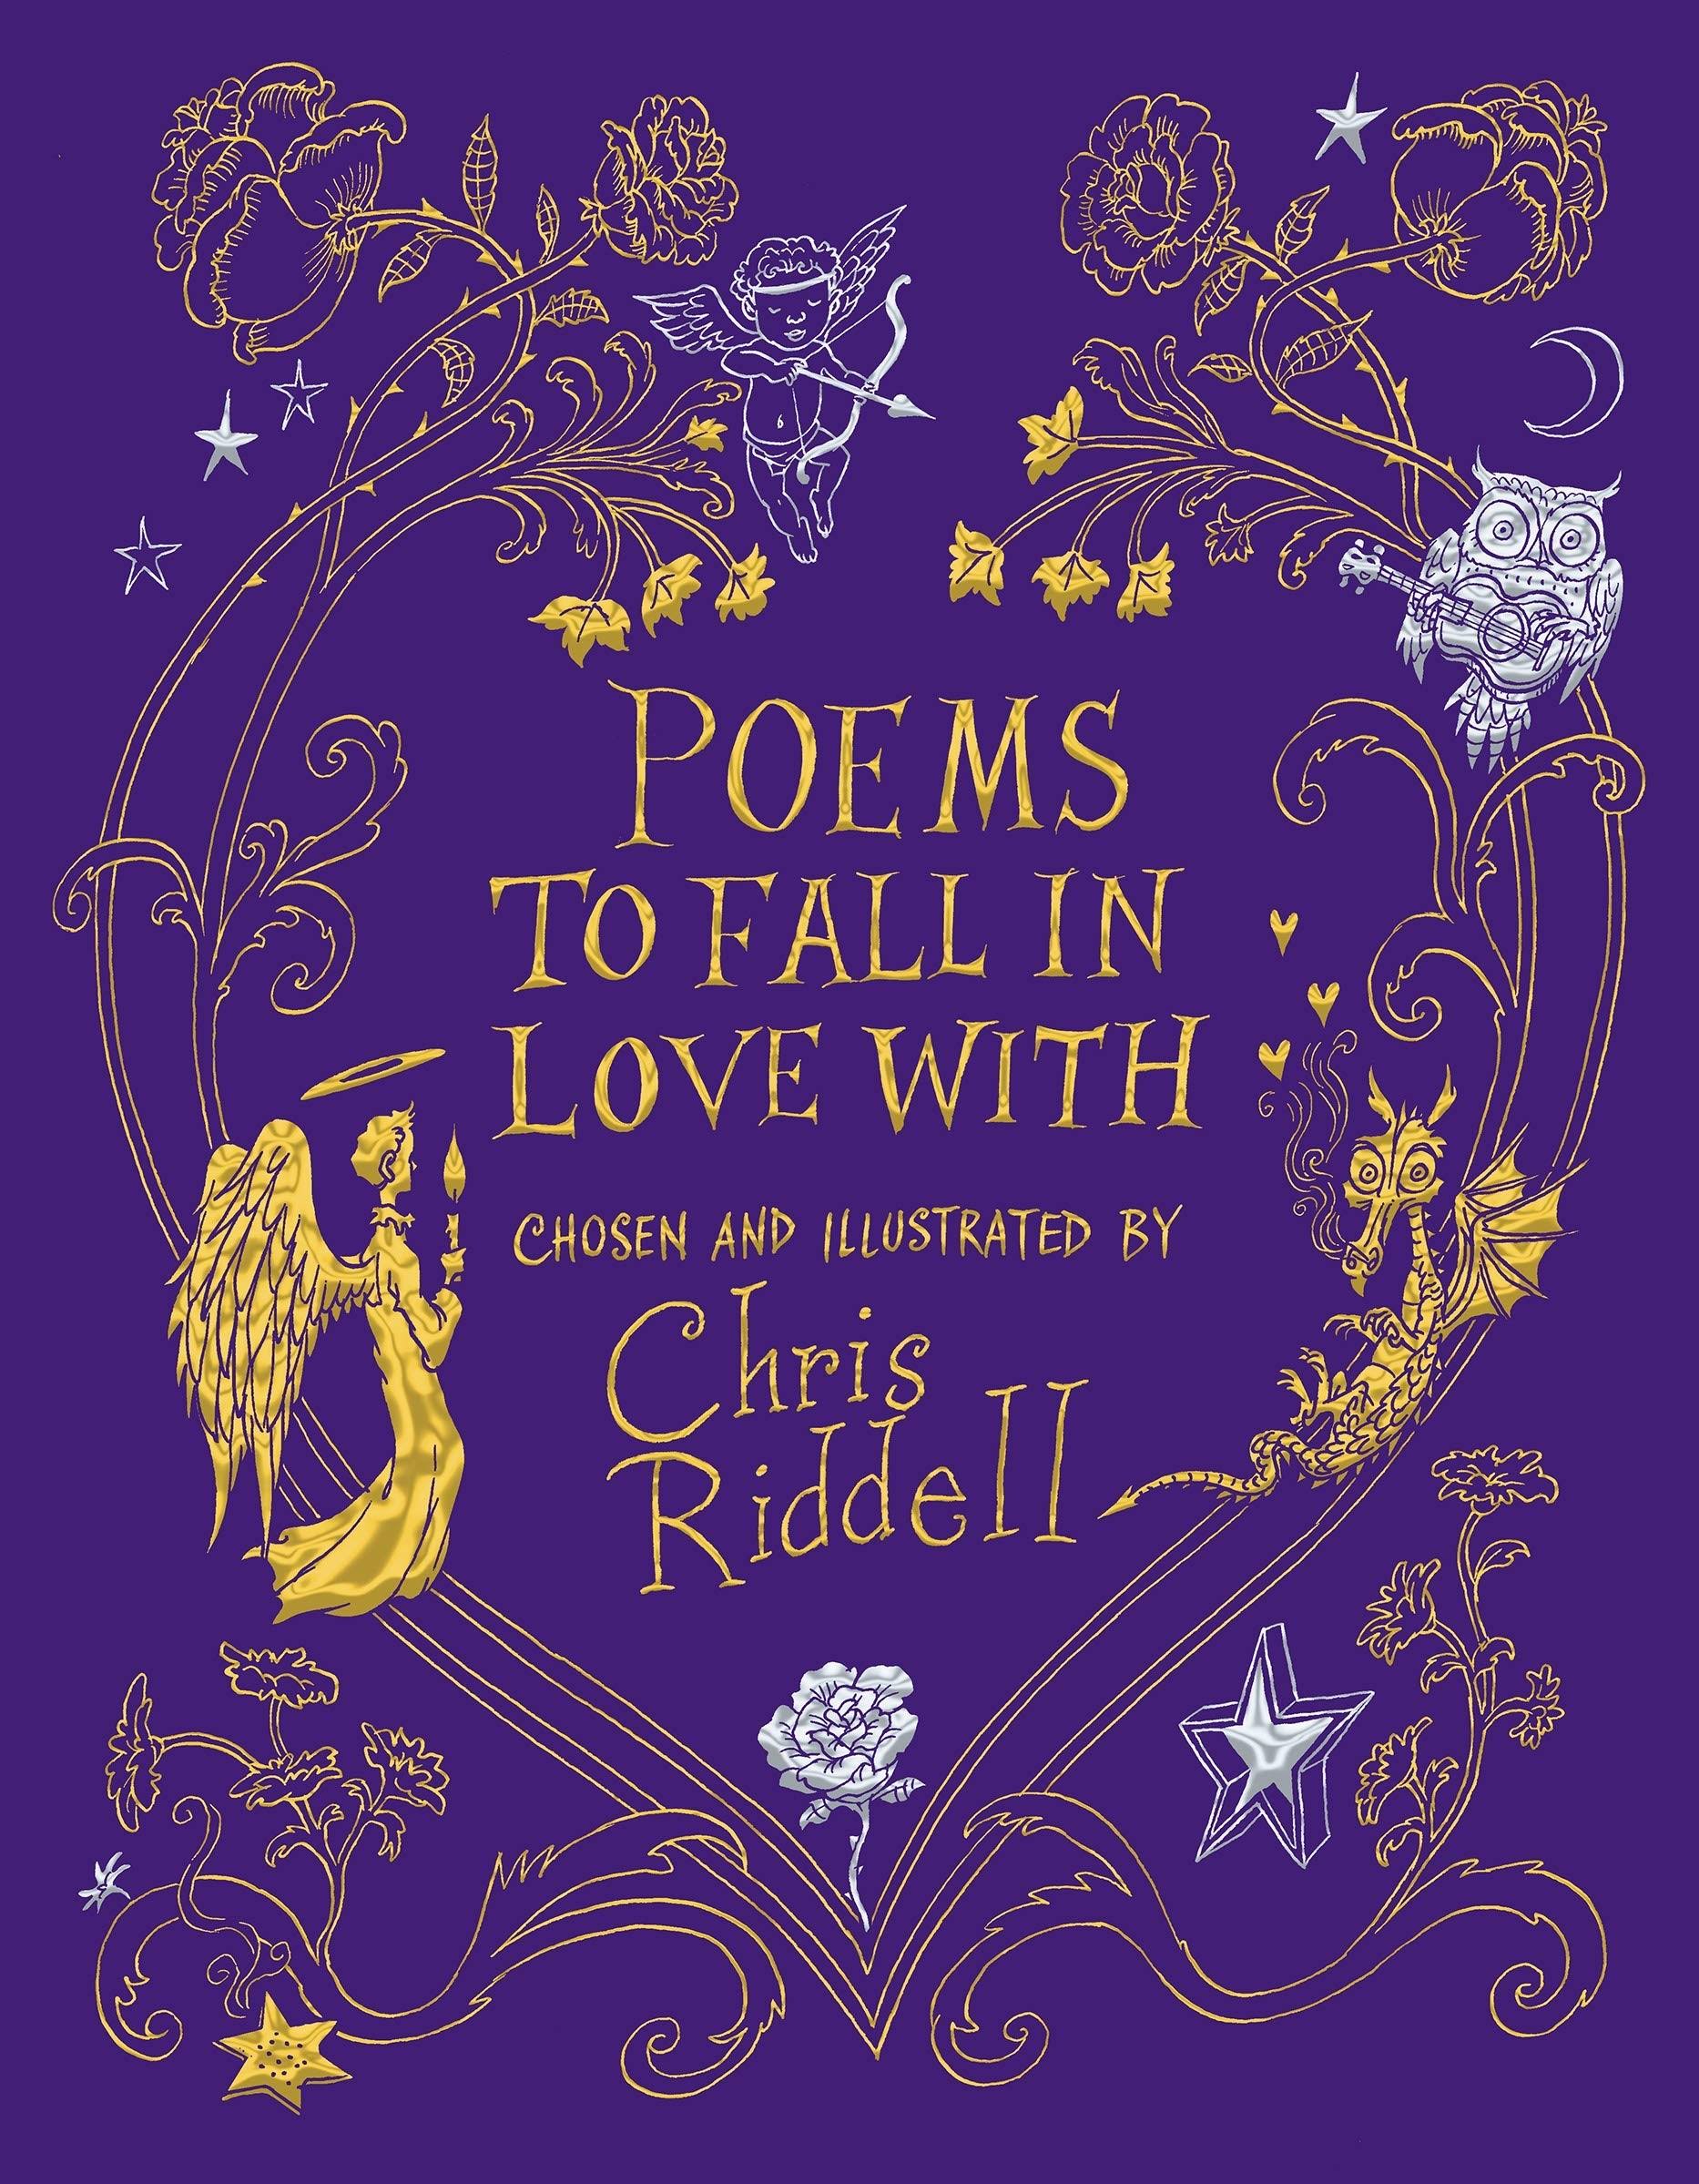 Poems to Fall in Love With - Chris Riddell